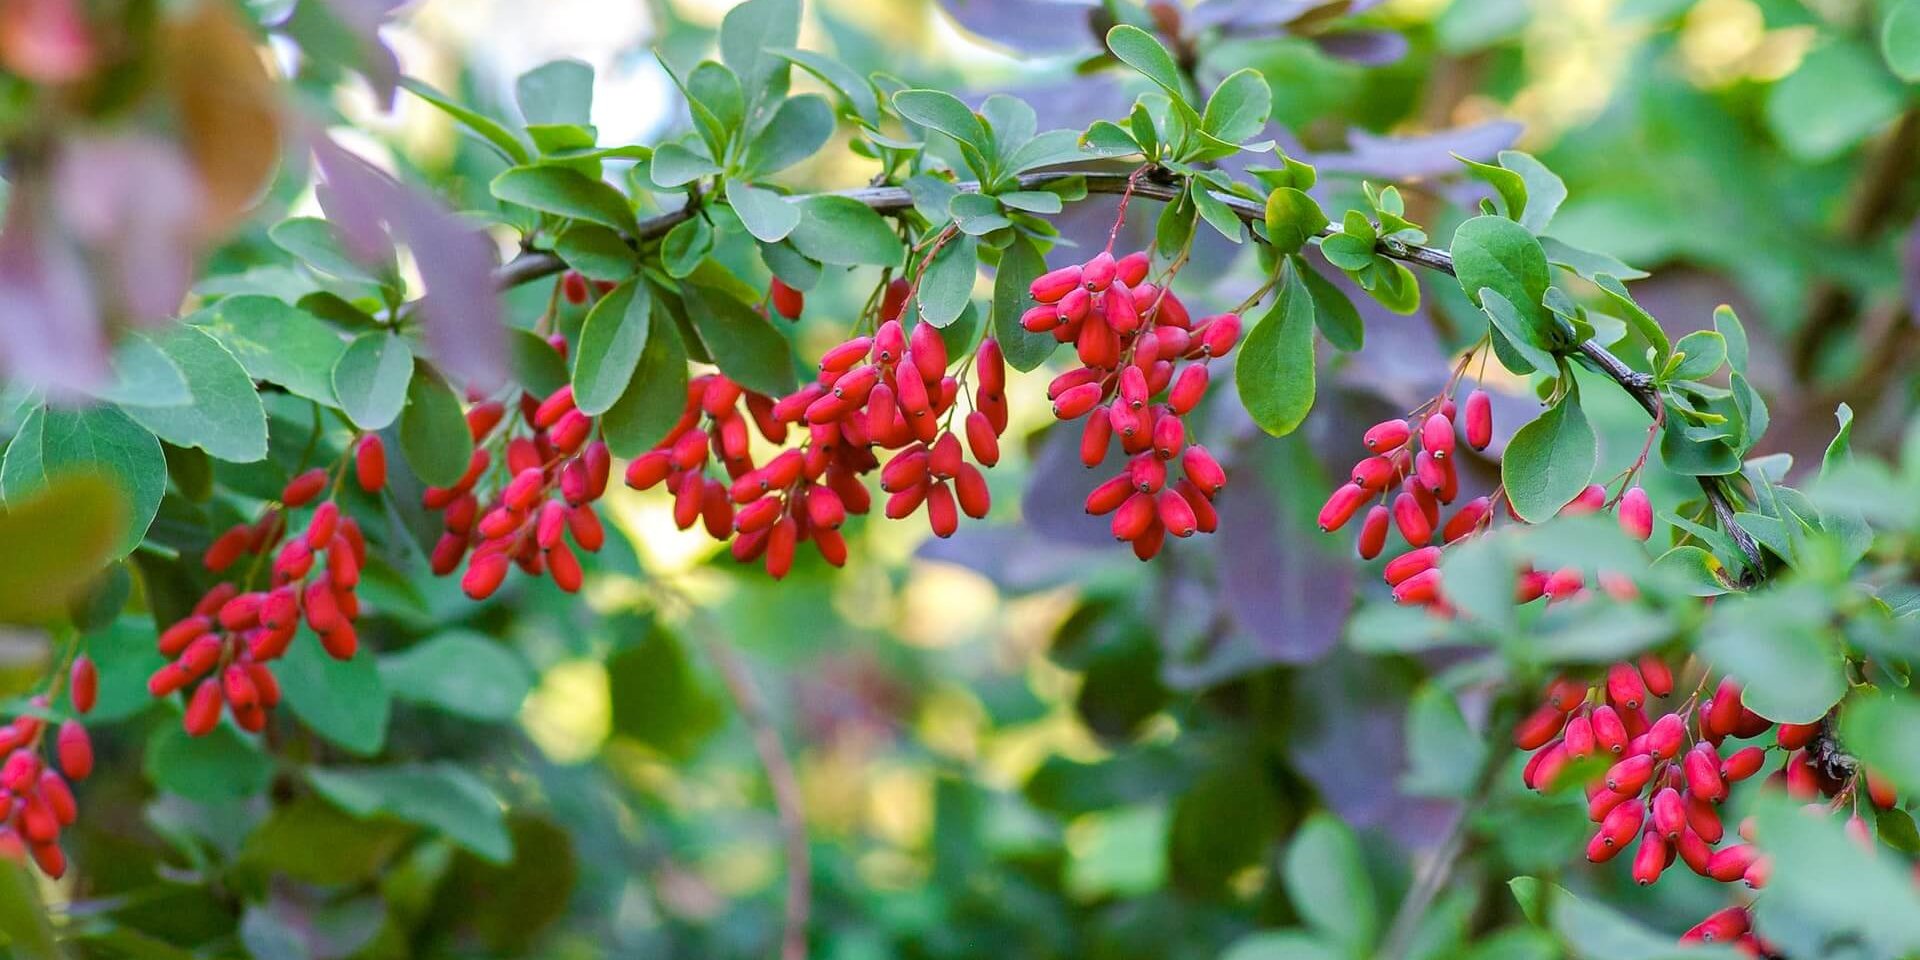 Red barberry berries on green branches